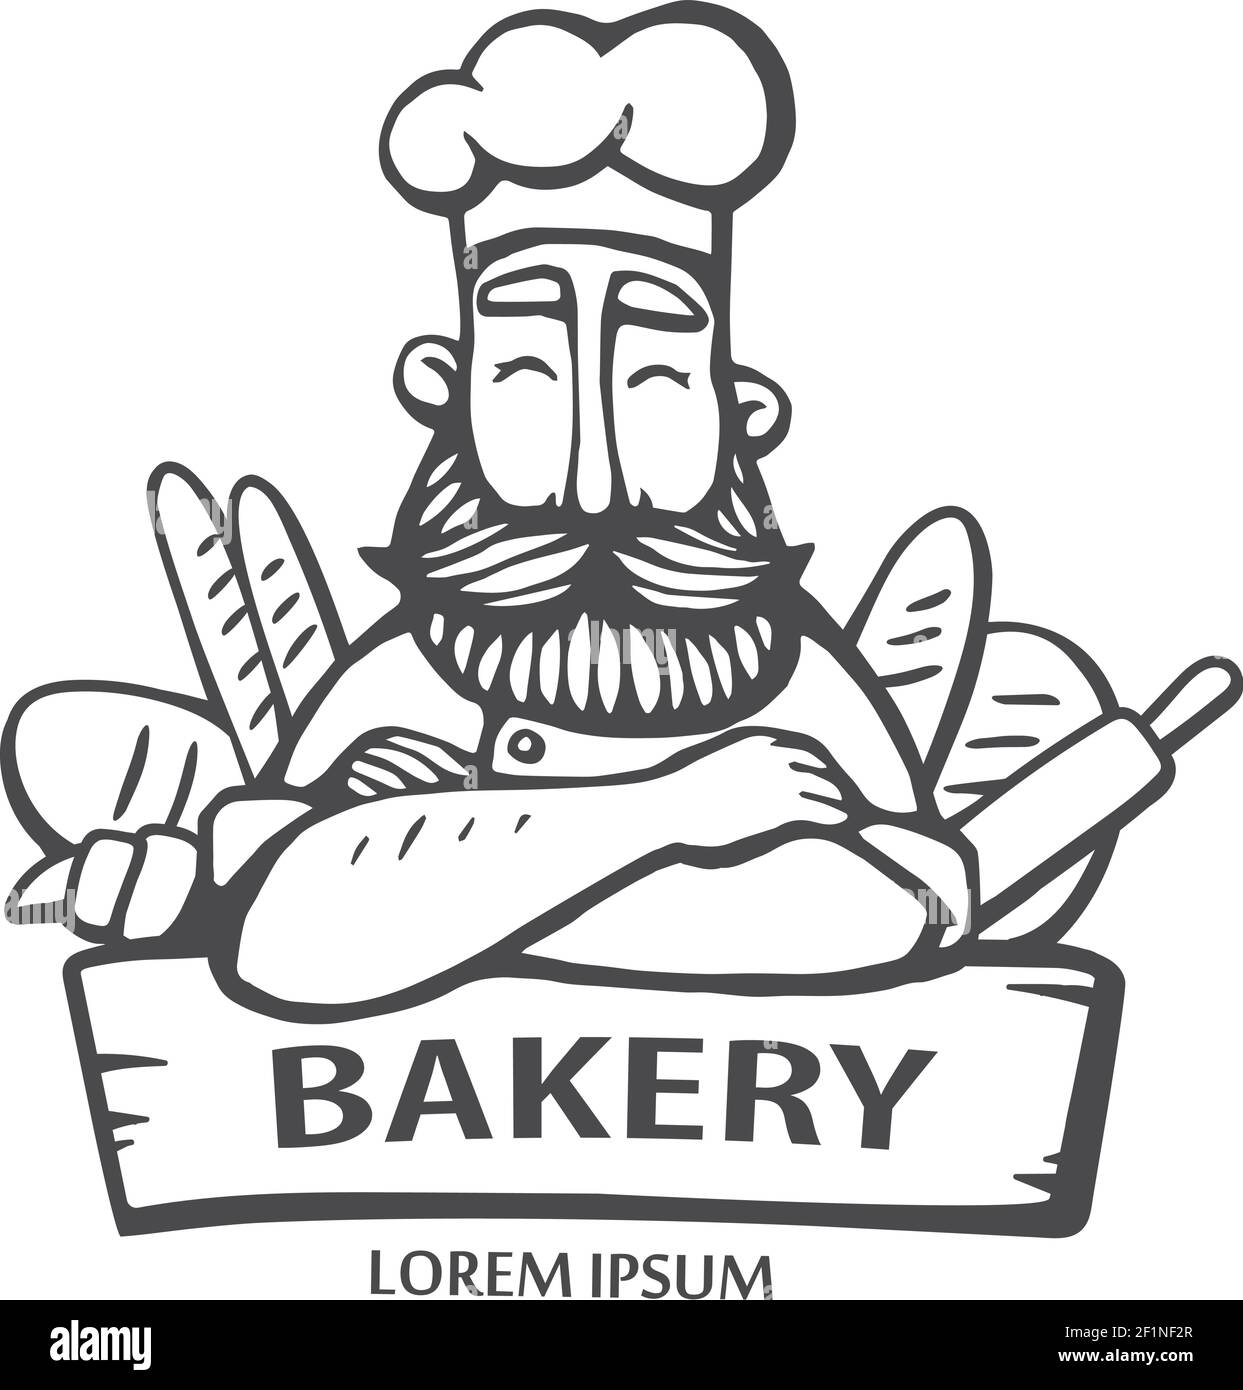 Bakery logo. Hand drawn vector illustration of chief-cooker with a mustache and beard in with a bread. chief logo. Stock Vector